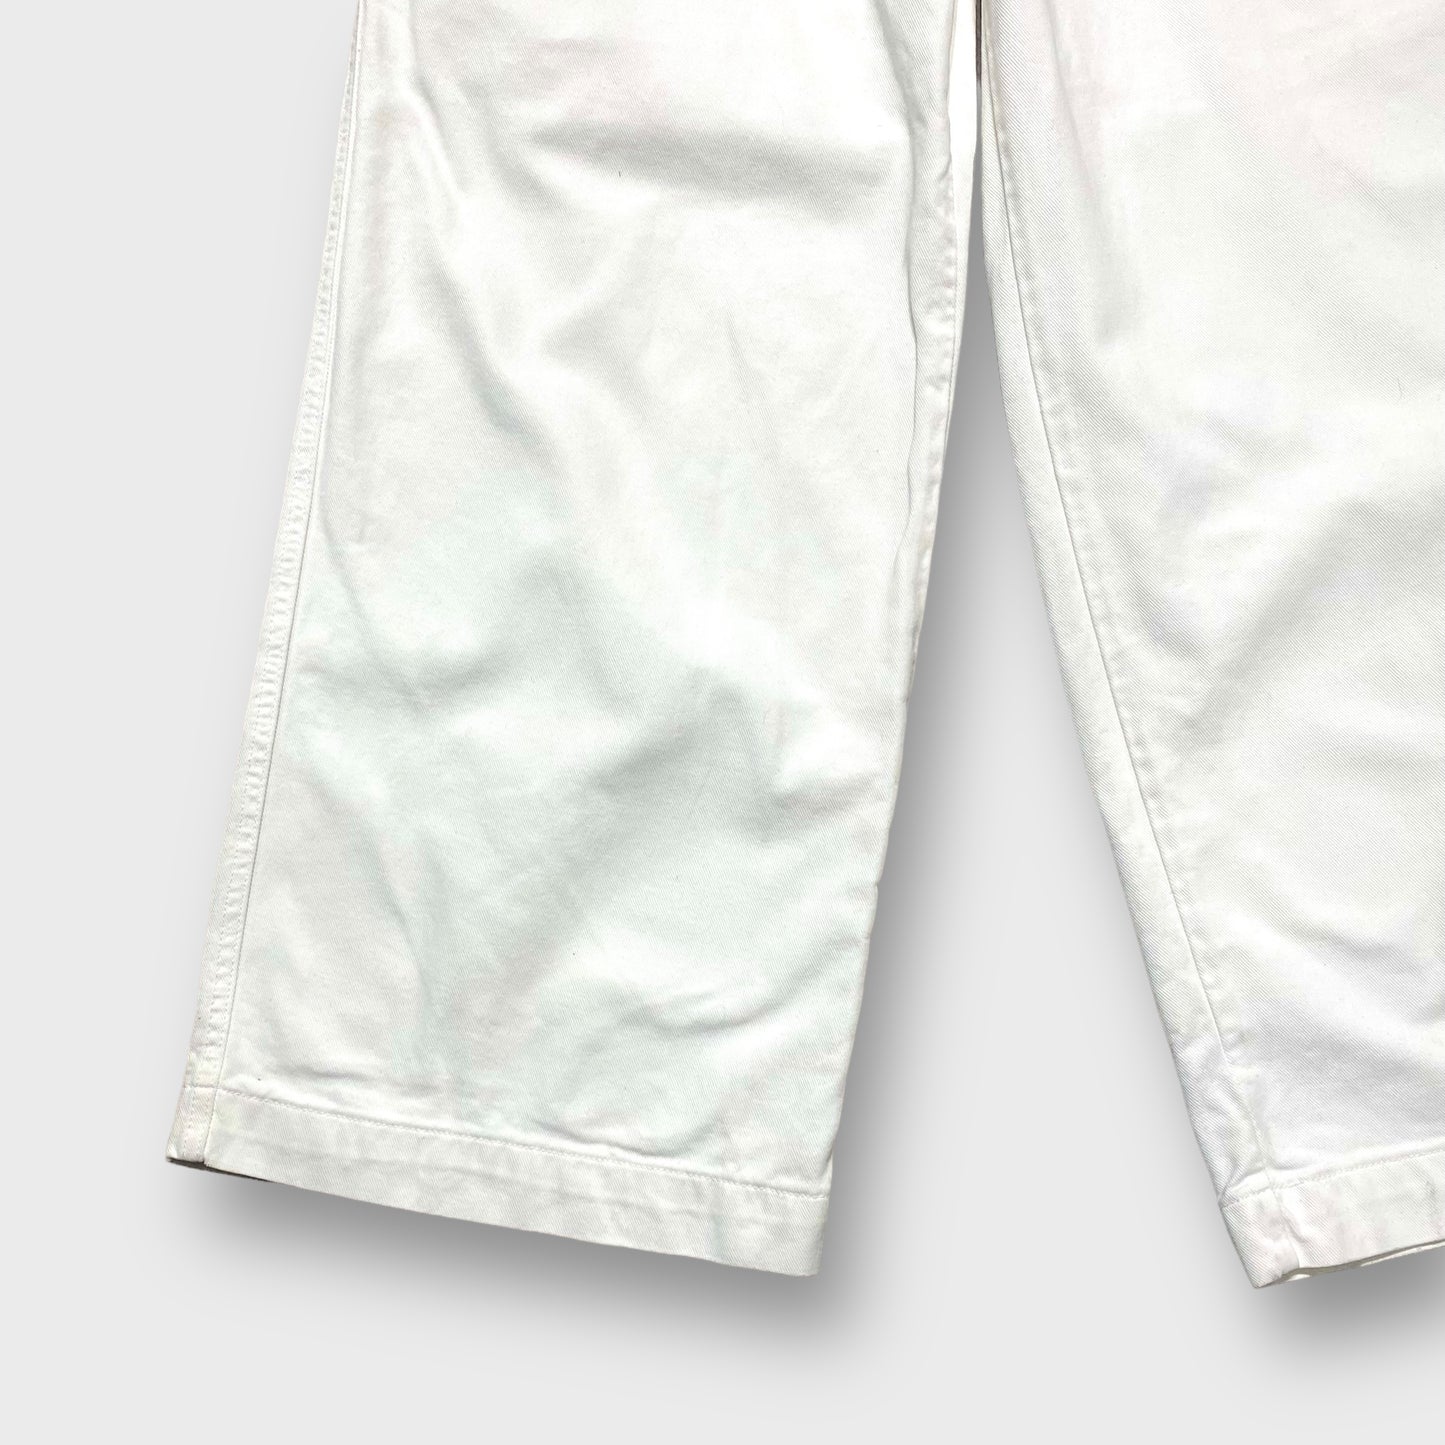 "JNCO JEANS" Baggy flare white color denim pants